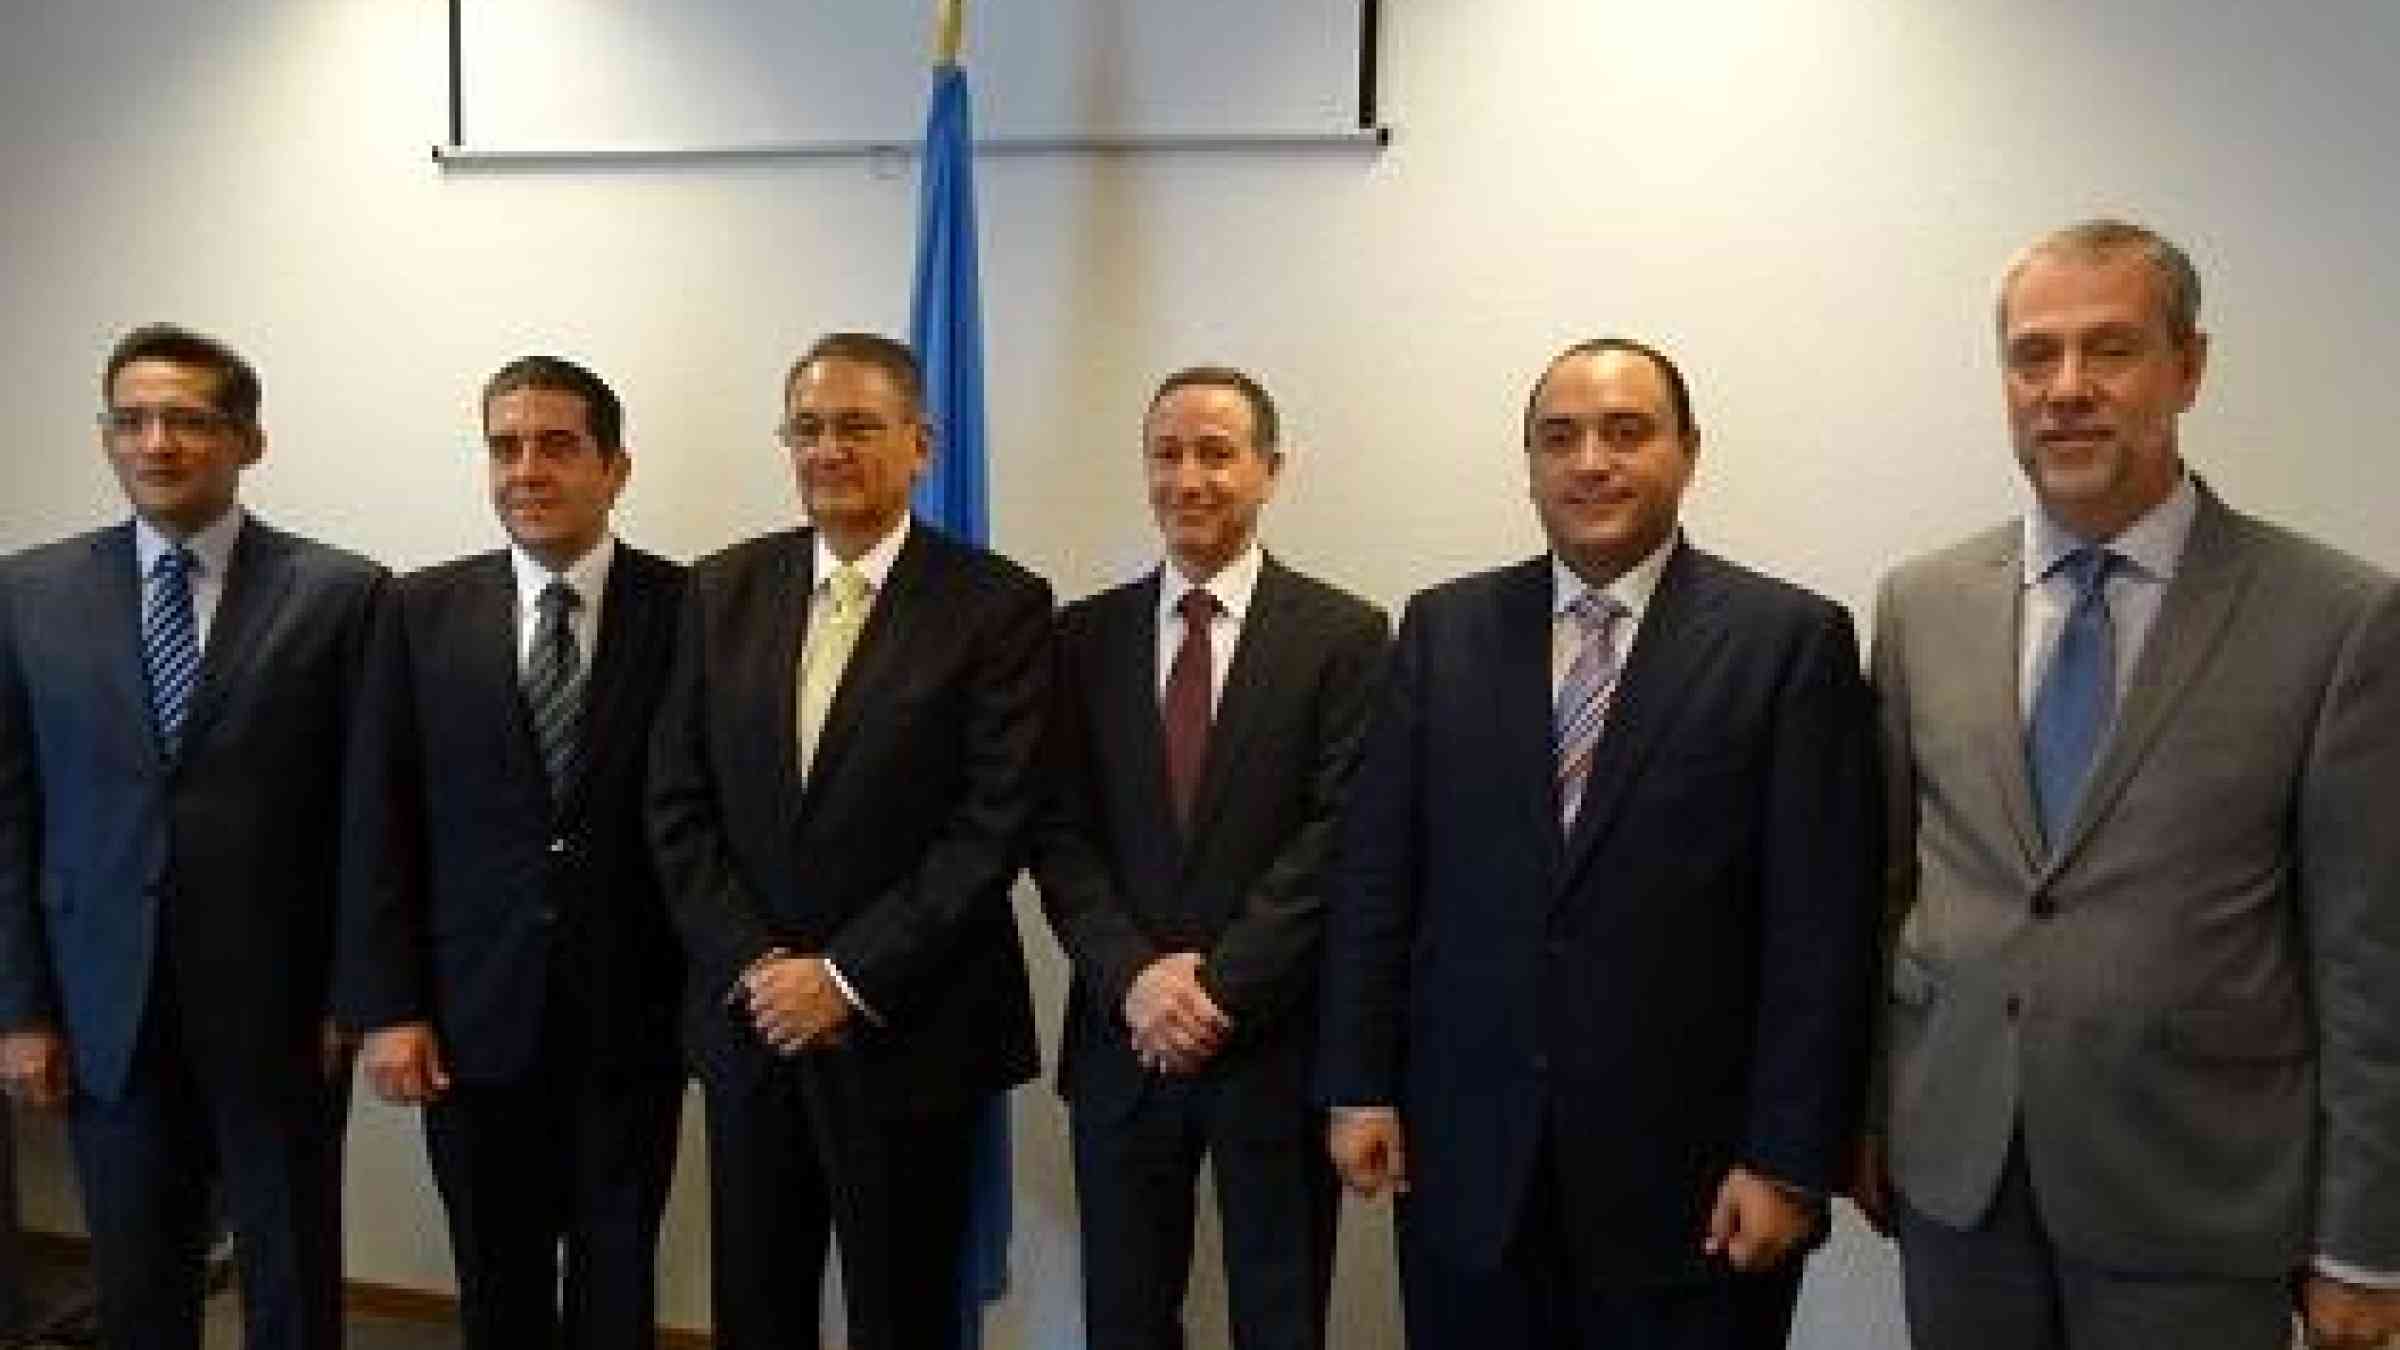 (Left to right): Mr. Rogelio Conde, General Director of Liaison and Regulations (NCCP), Mr. Jose Maria Tapia, General Director of DRM, (NCCP),Mr. Luis Felipe Puente, National Coordinator of Civil Protection (NCCP), Robert Glasser, head of the UN Office for Disaster Risk Reduction, Roberto Borge, Governor of Quintana Roo, Cancun, Amb. Jorge Lomonaco, Permanent Representative of Mexico to the UN in Geneva.